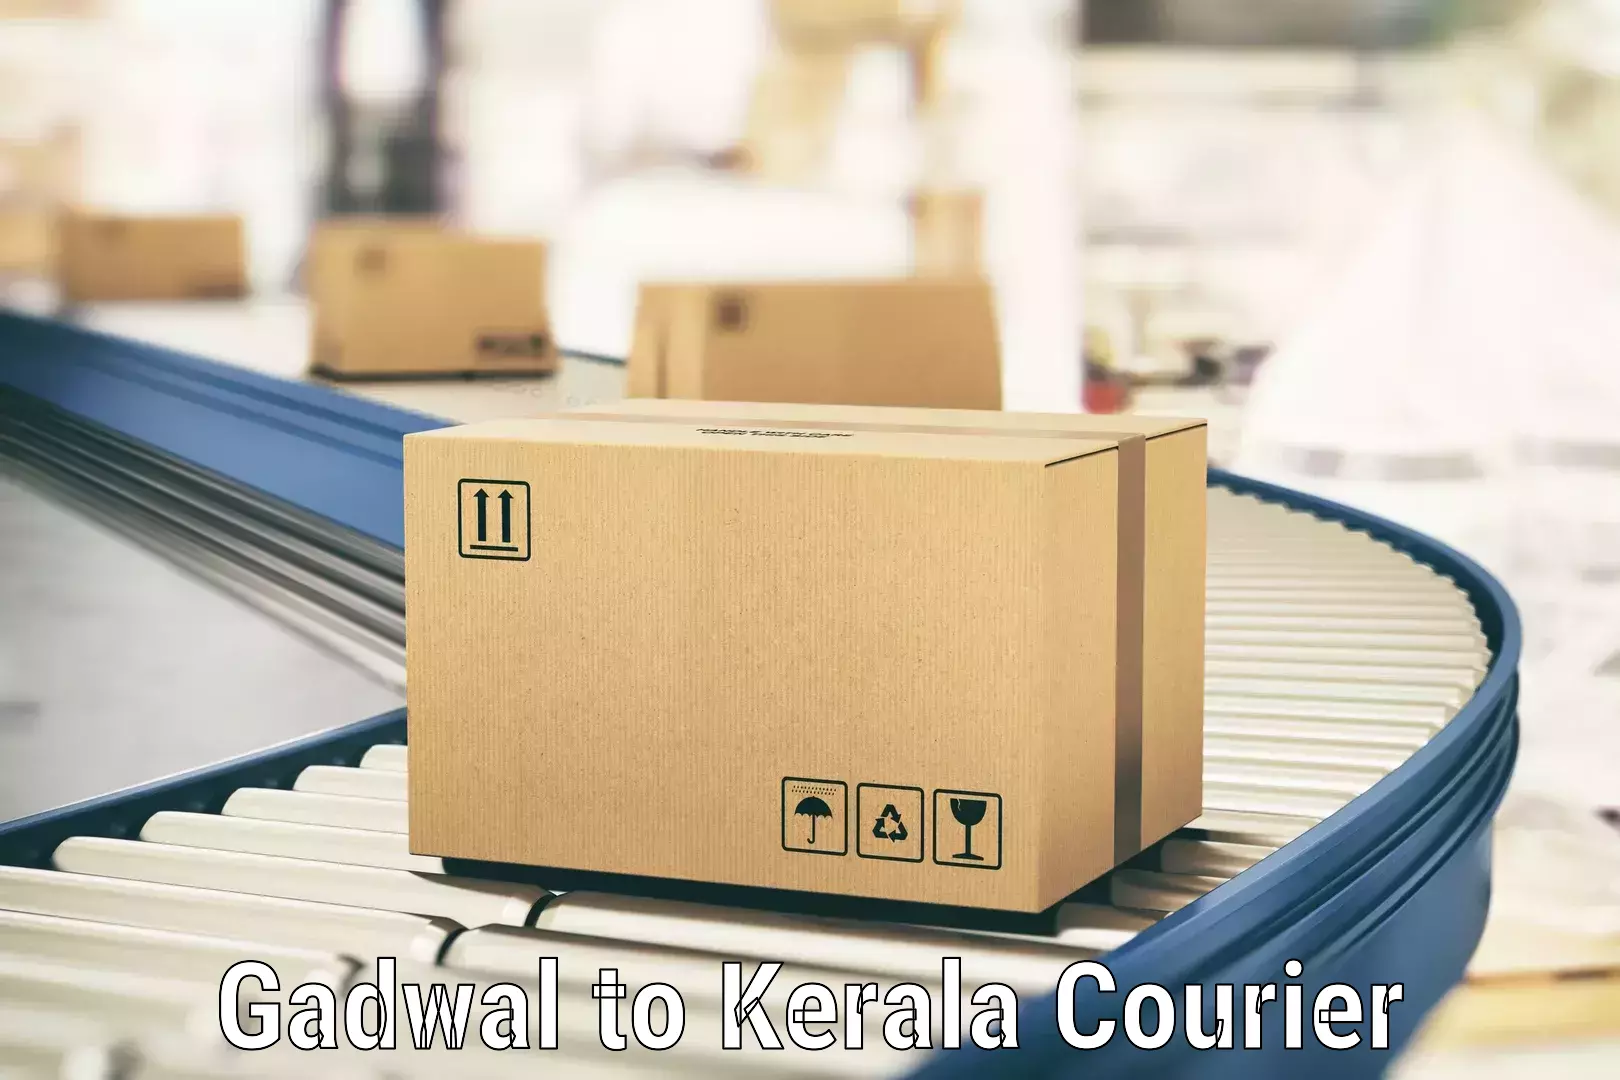 Express delivery solutions Gadwal to Kerala